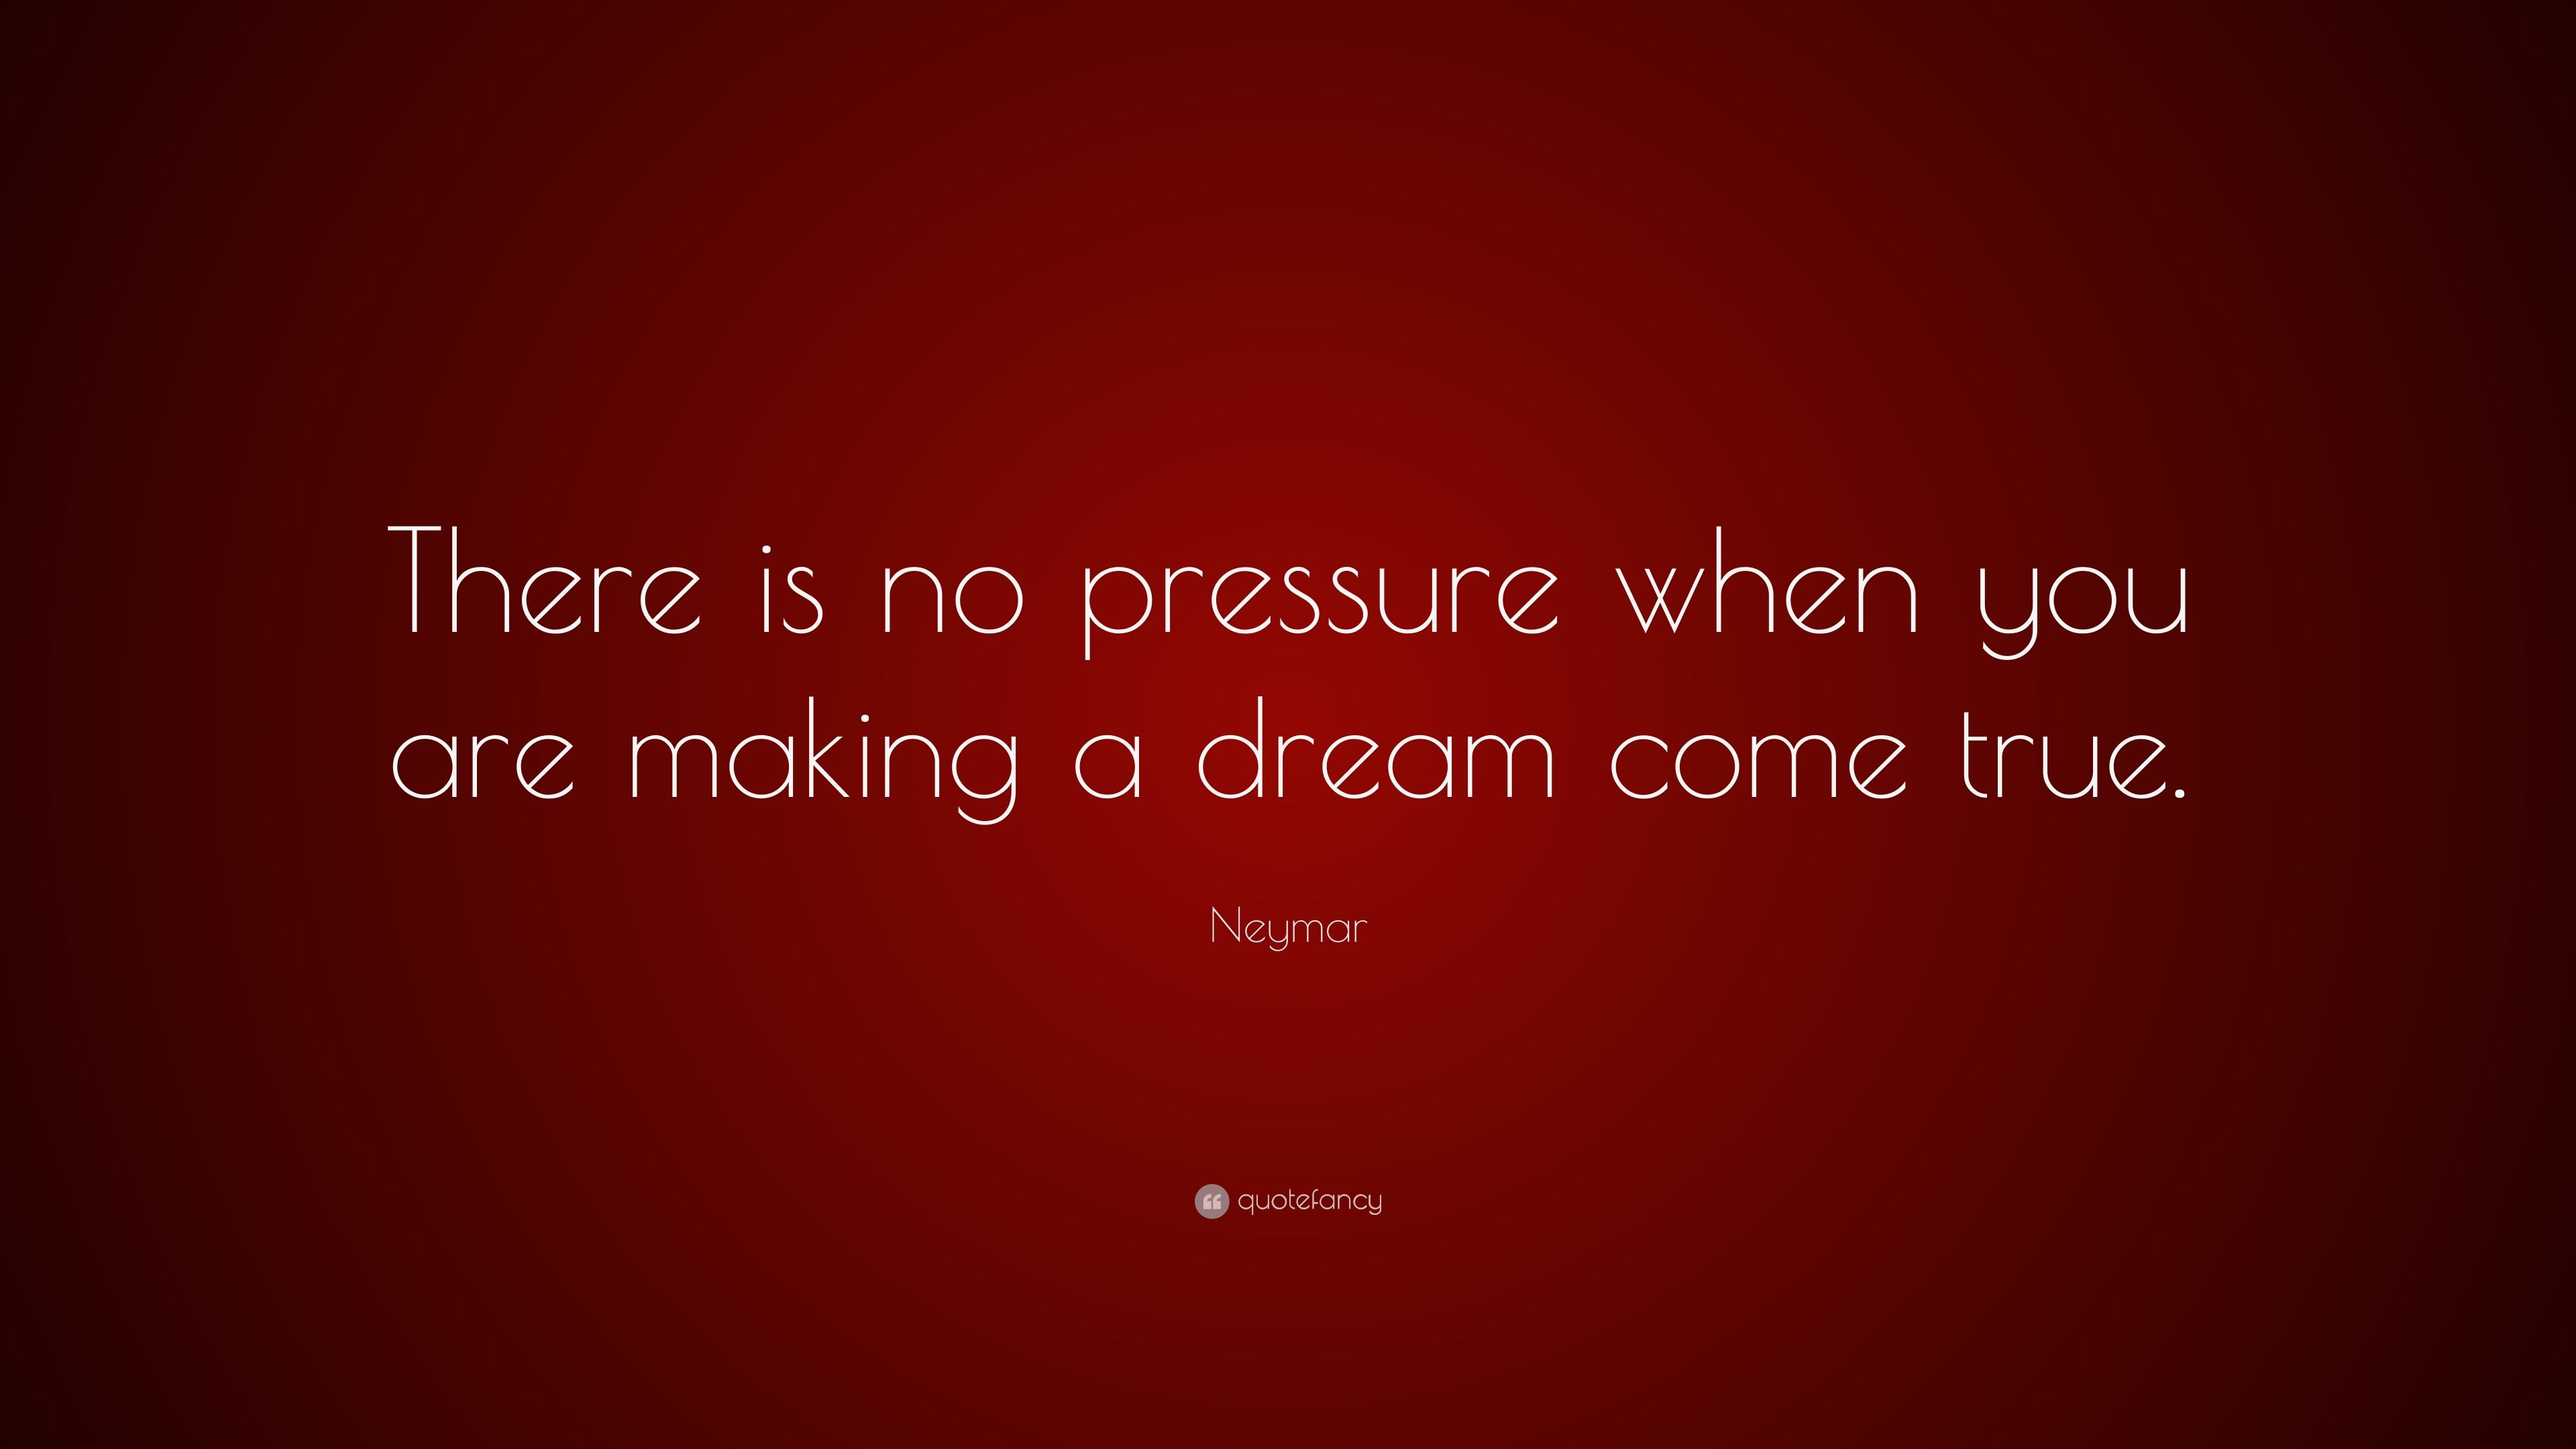 Neymar Quote: “There is no pressure when you are making a dream come true.” (7 wallpaper)